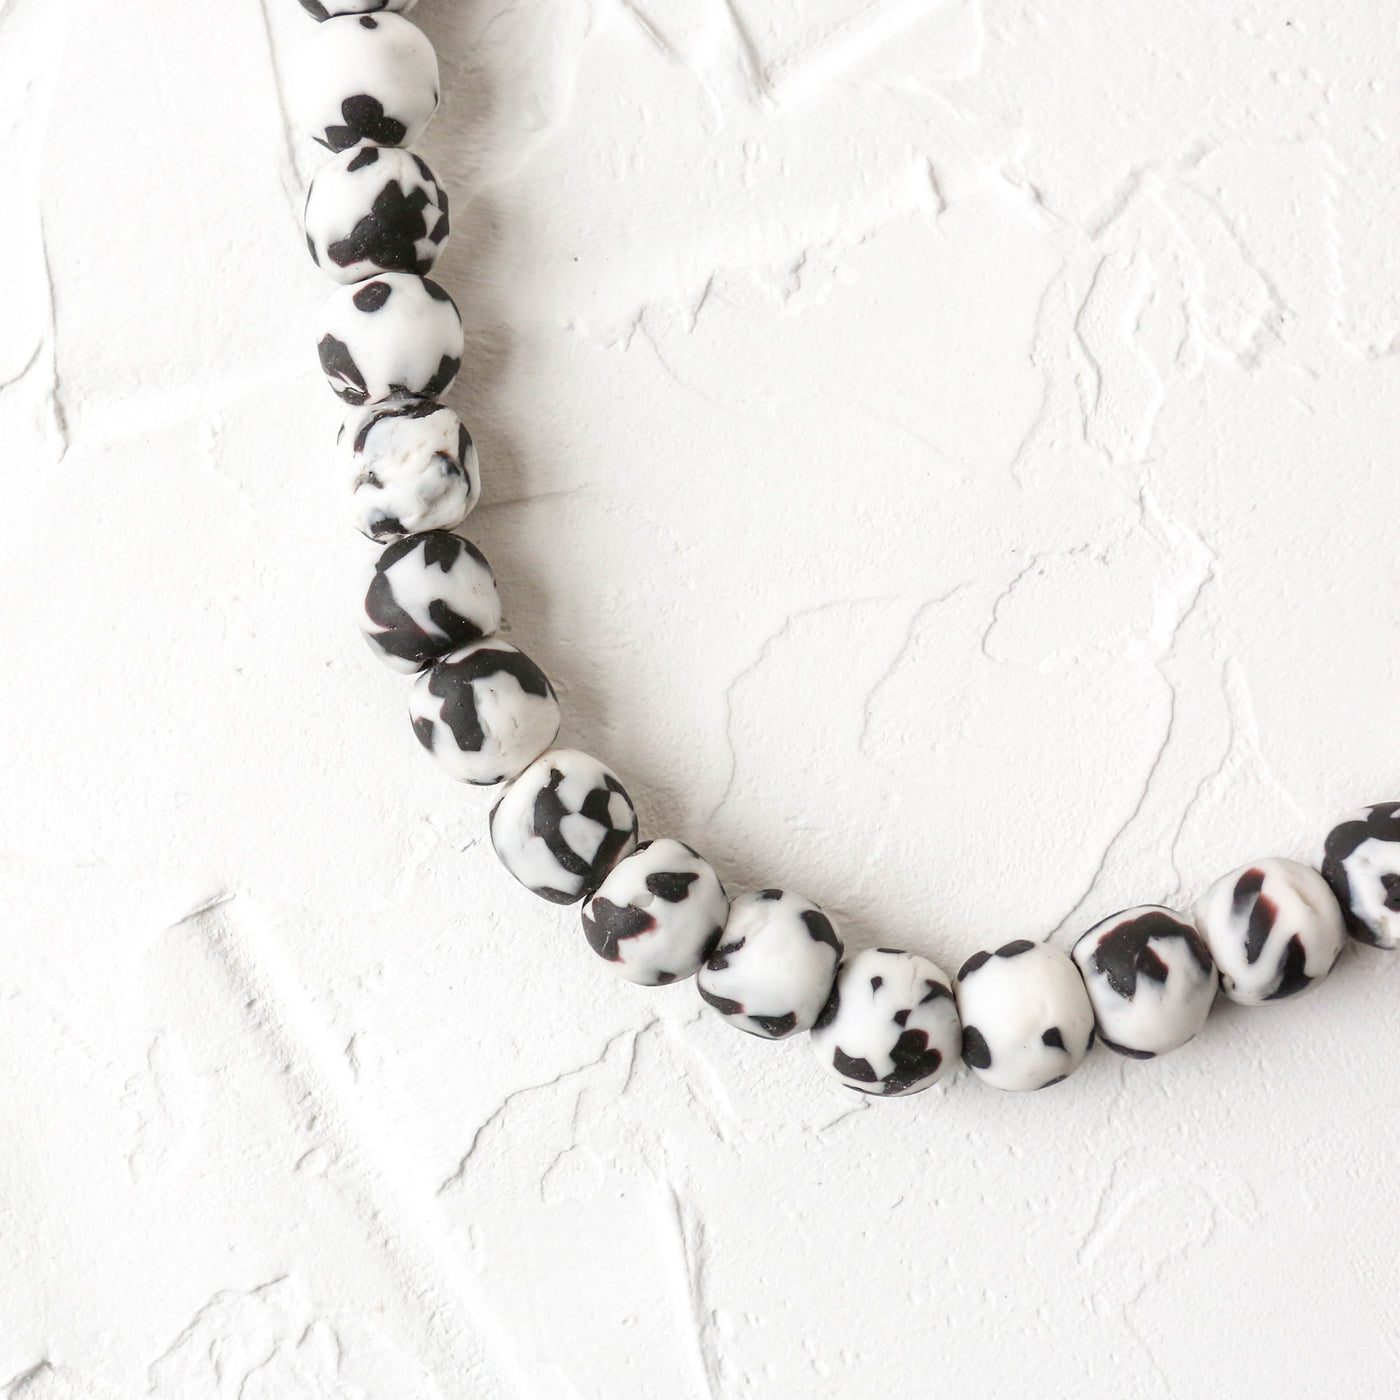 Recycled Glass Beads - 14mm Black & White Patterned